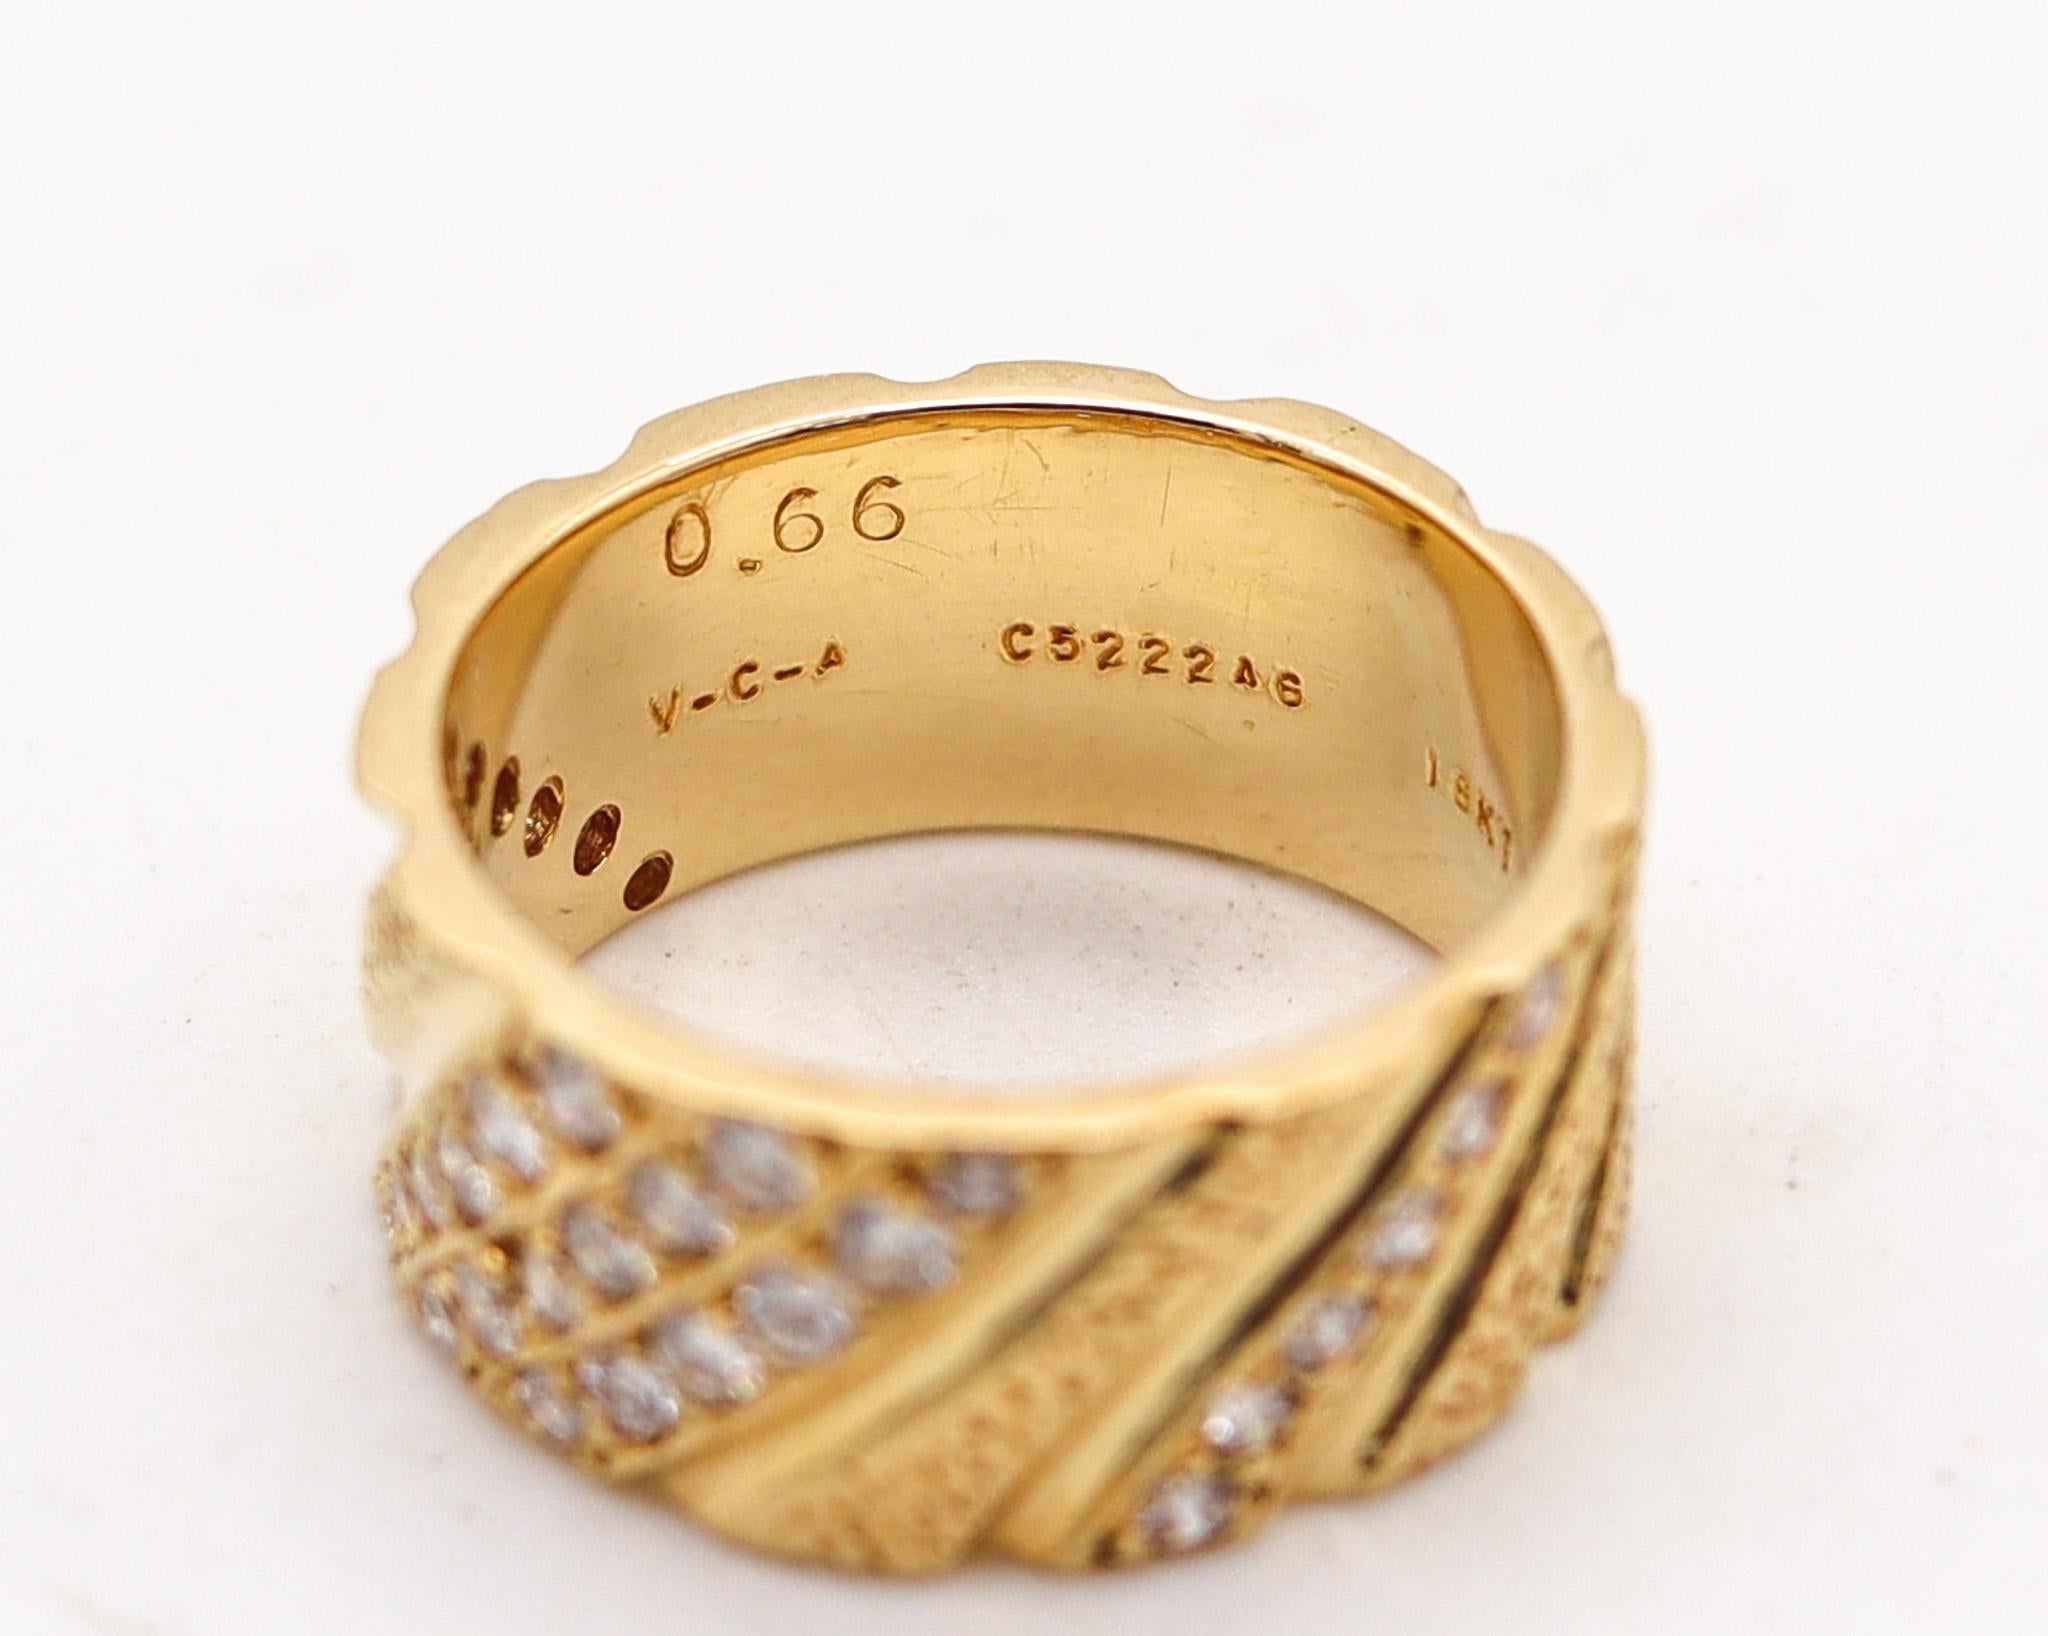 Modernist Van Cleef & Arpels 1970 Paris Band Ring In 18Kt Yellow Gold With VVS Diamonds For Sale